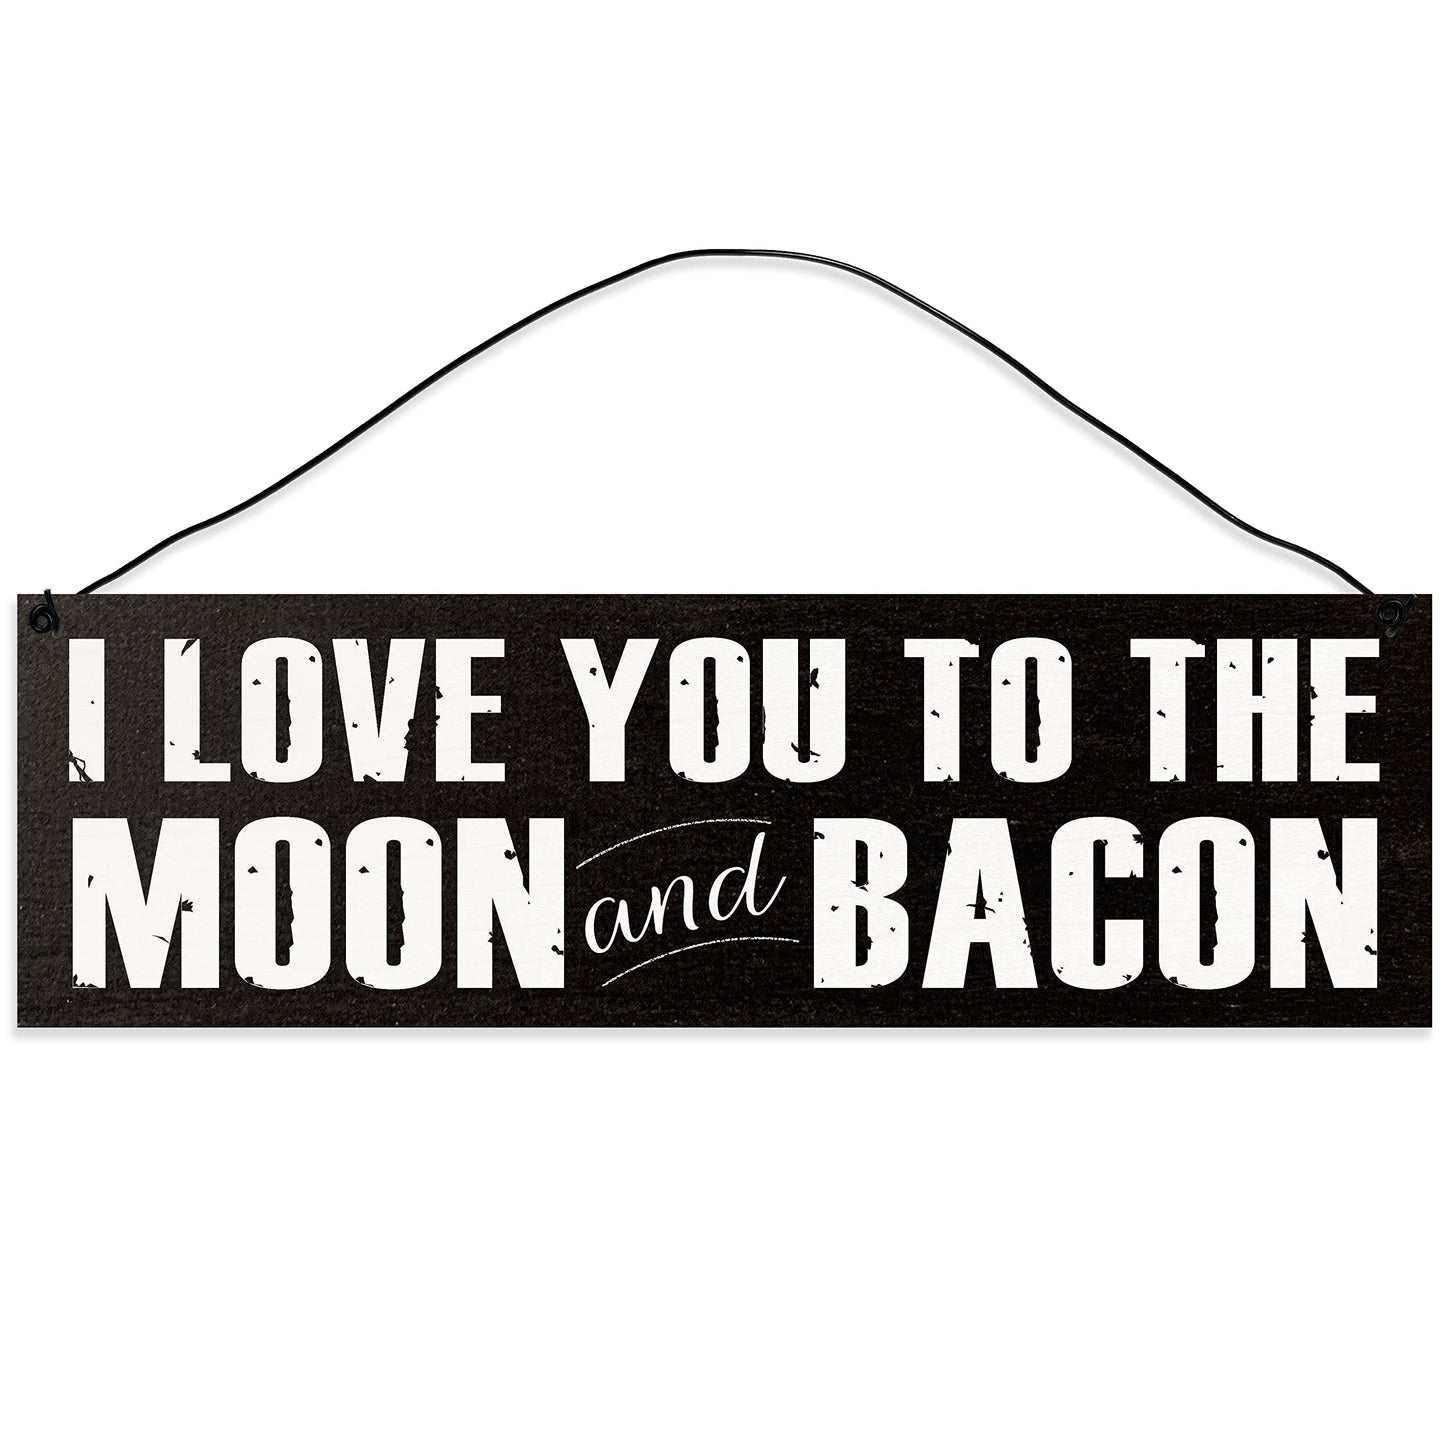 I Love You to The Moon and Bacon.